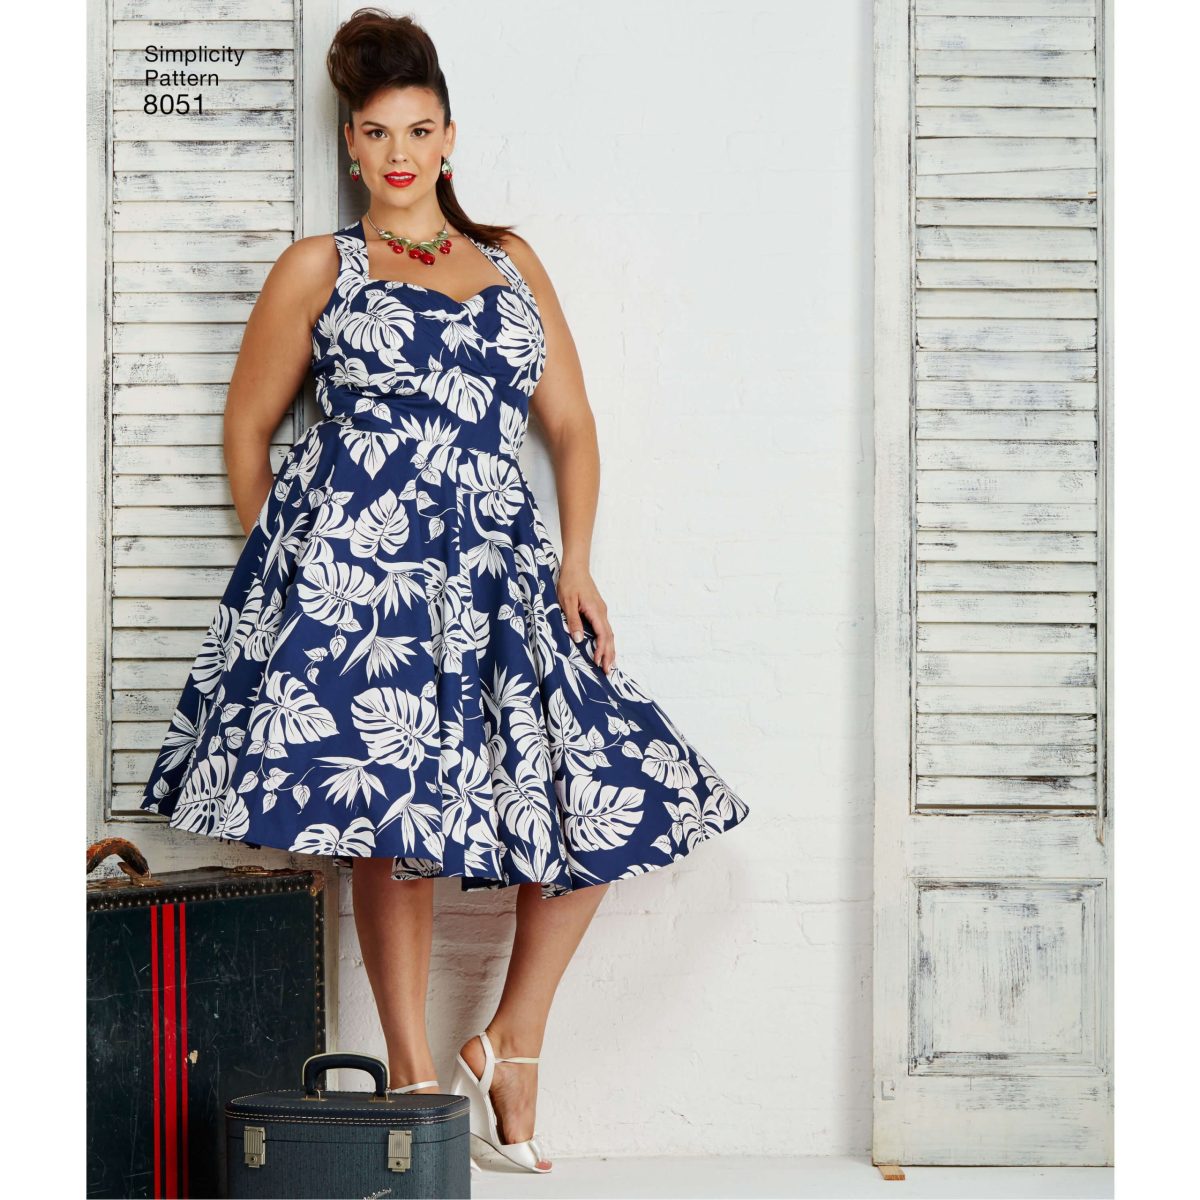 Simplicity Sewing Pattern 8051 Misses and Plus Size Dresses